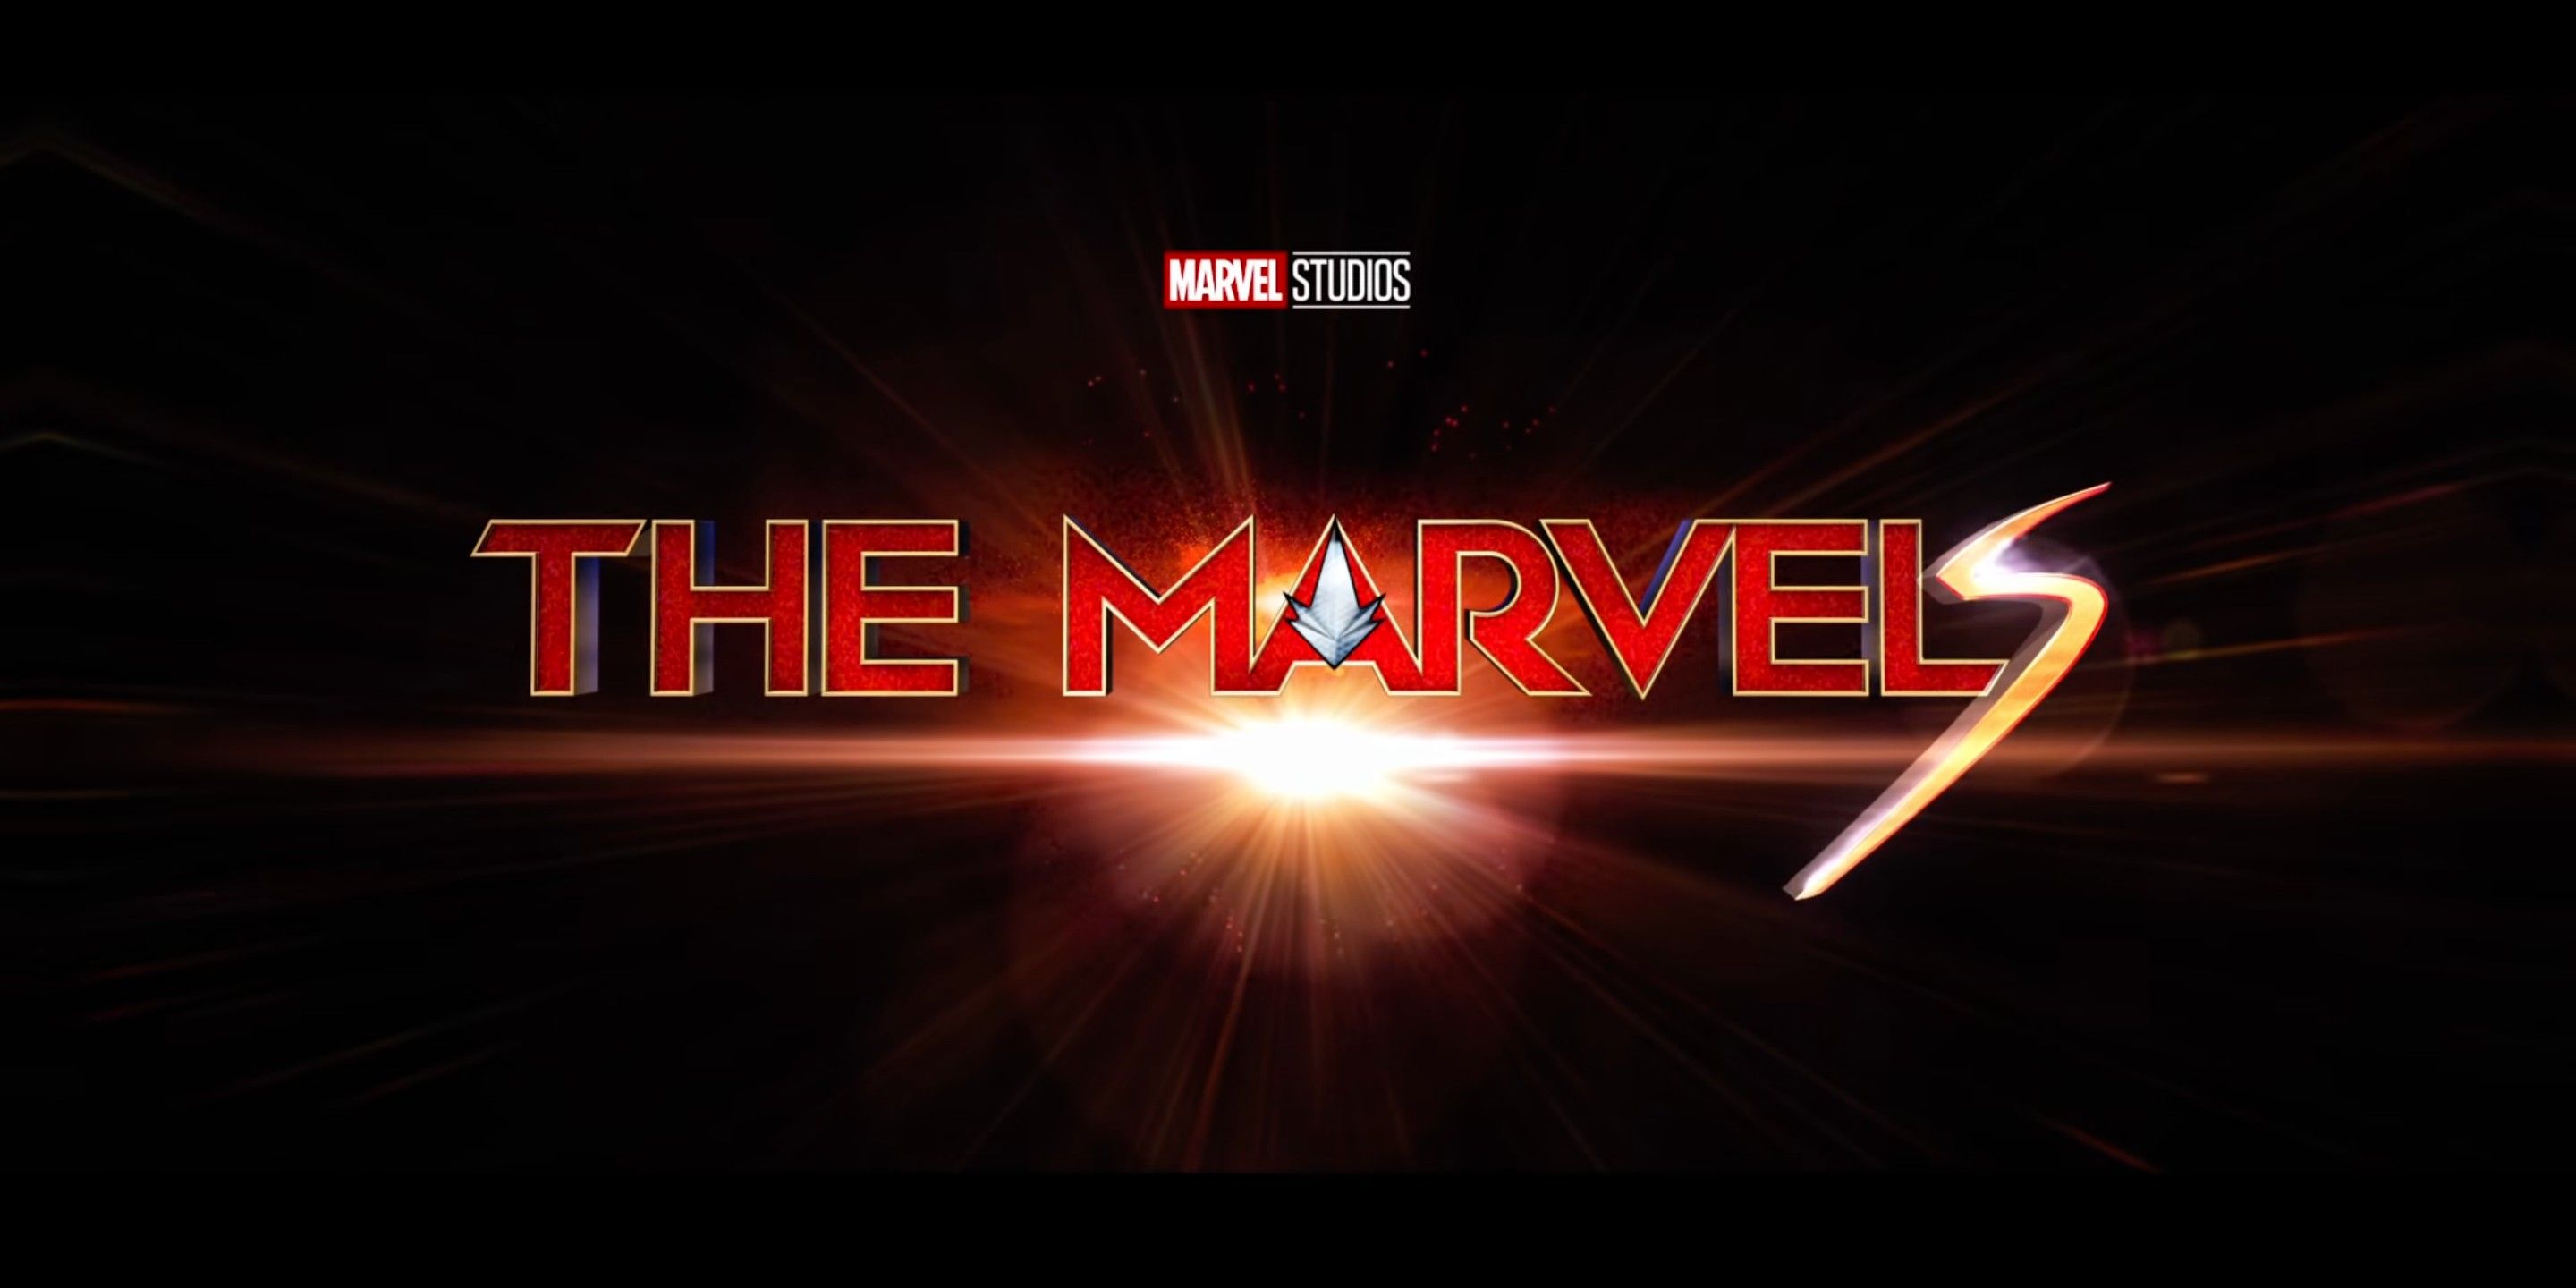 An image of The Marvels movie logo.